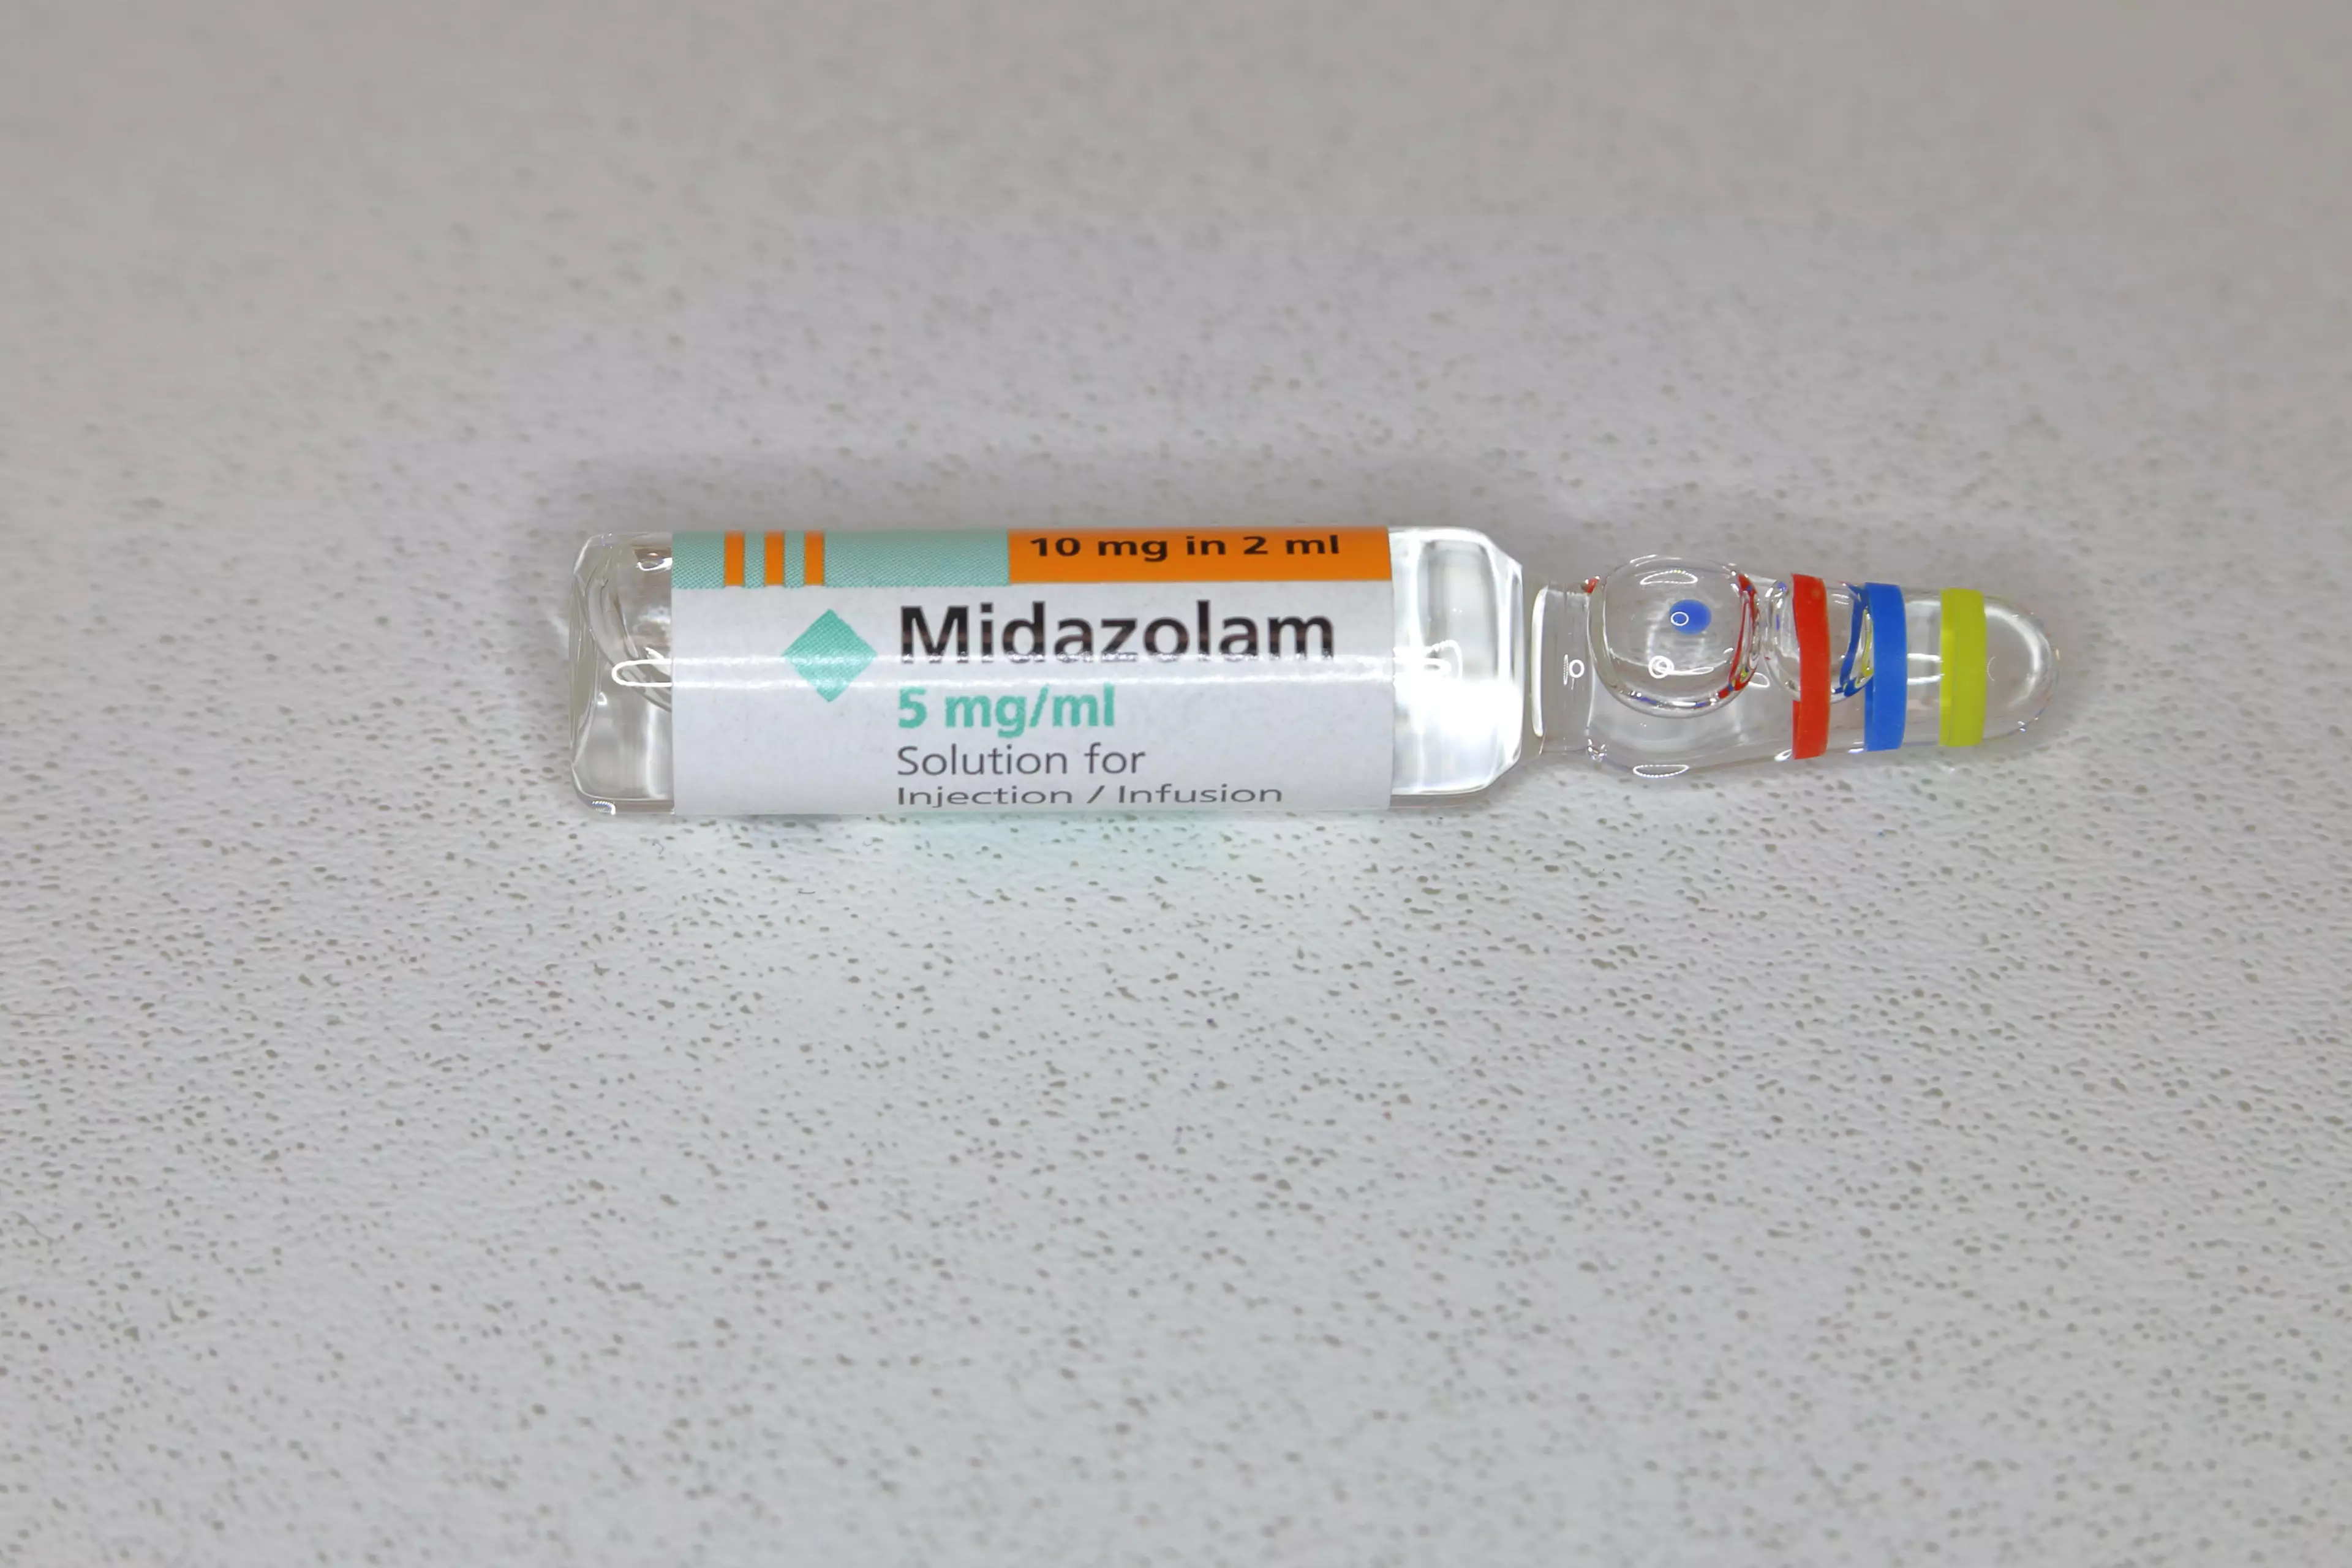 The controversial drug, Midazolam.